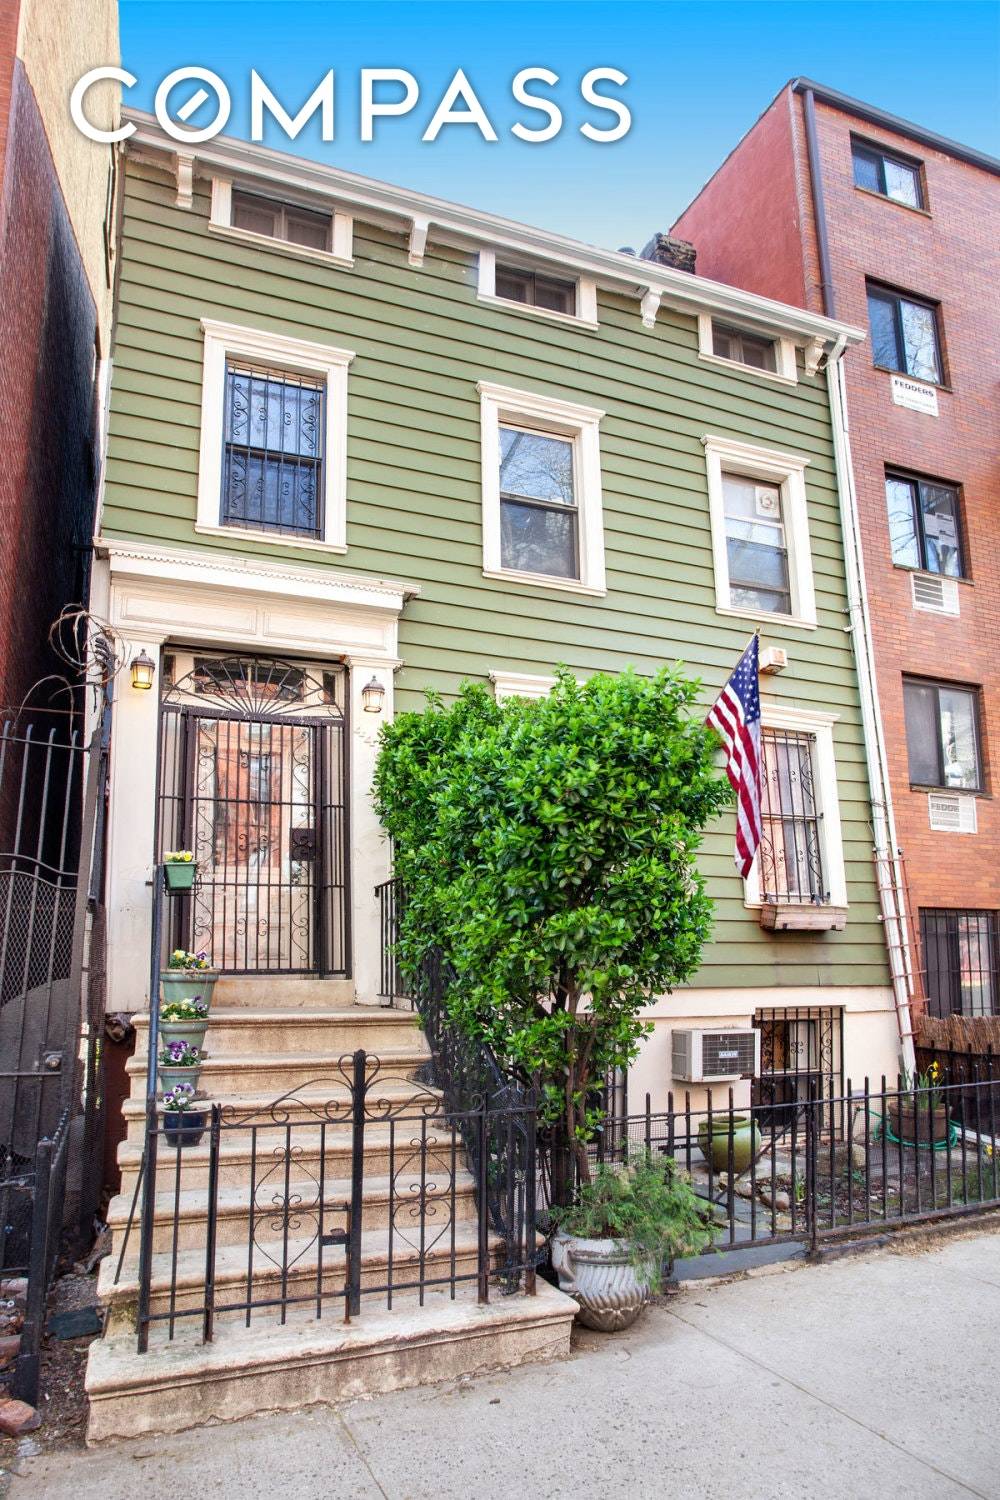 Country house in the city offers charm, light, and opportunity in cosmopolitan Boerum Hill.